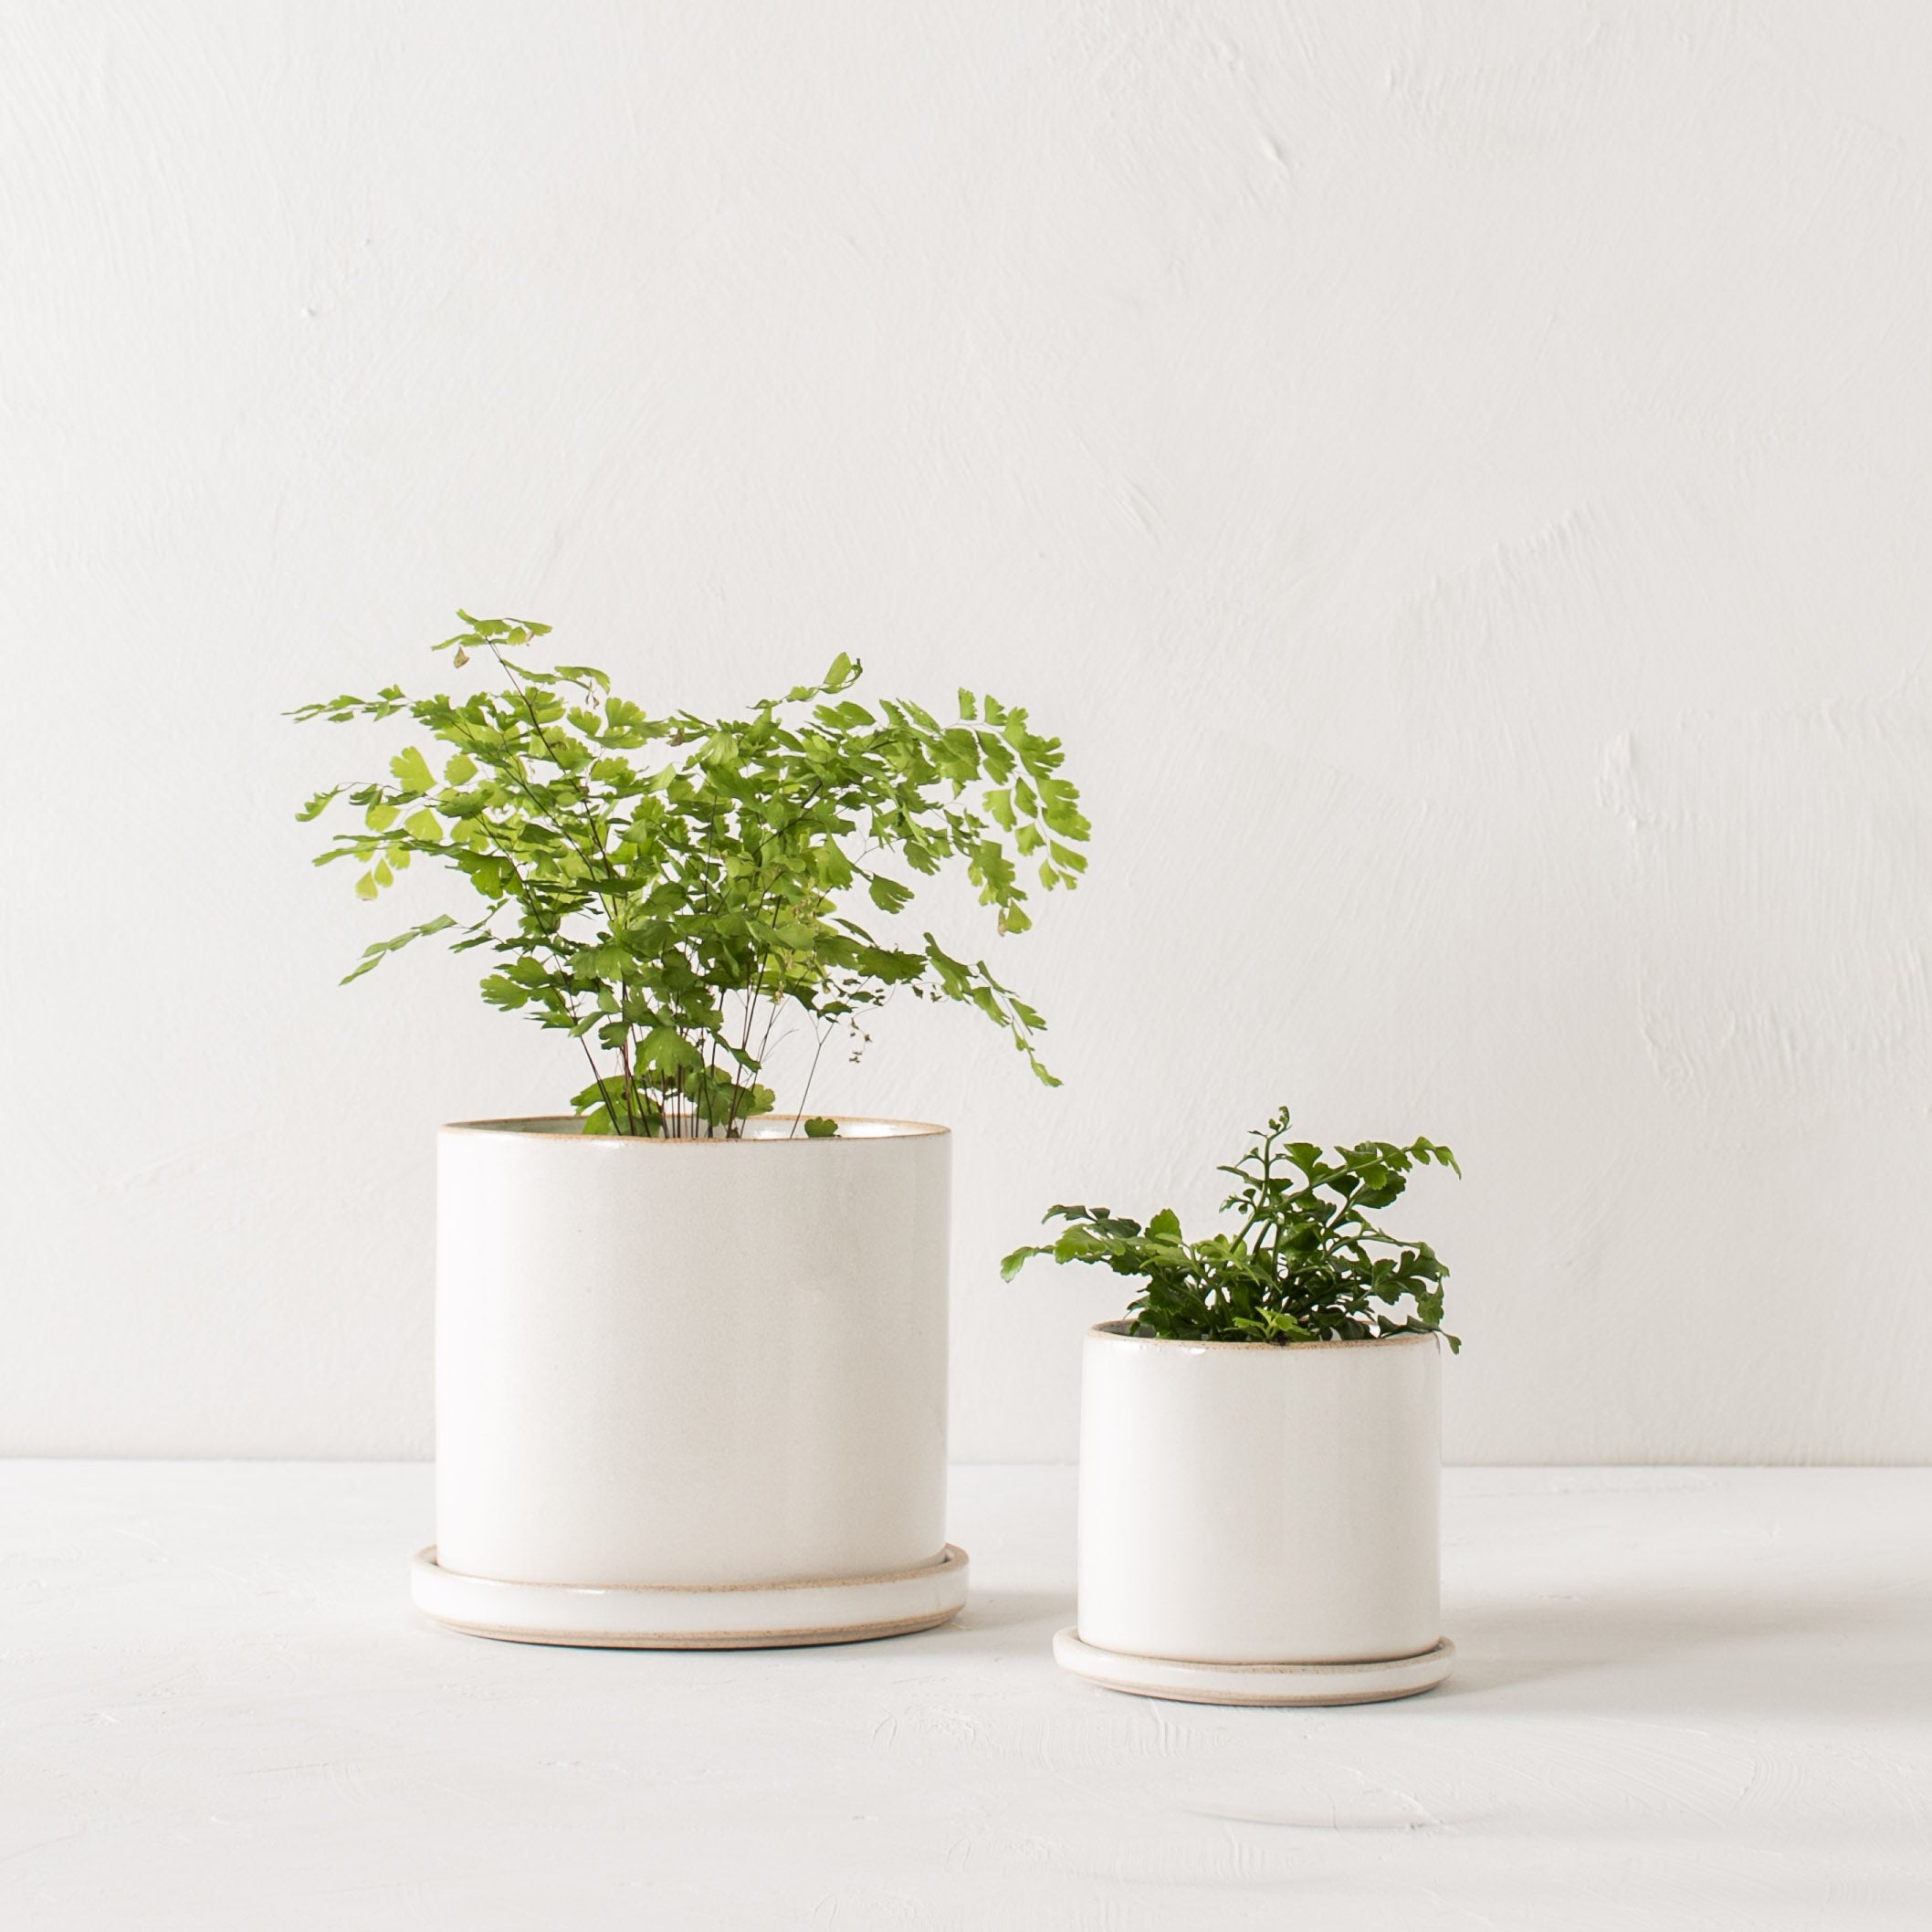 Two minimal white ceramic planters, they have exposed stoneware rims and bases. Both planters have plants inside as well as bottom drainage dishes. Handmade ceramic planters designed by Convivial Production, Kansas City, Mo plant store.